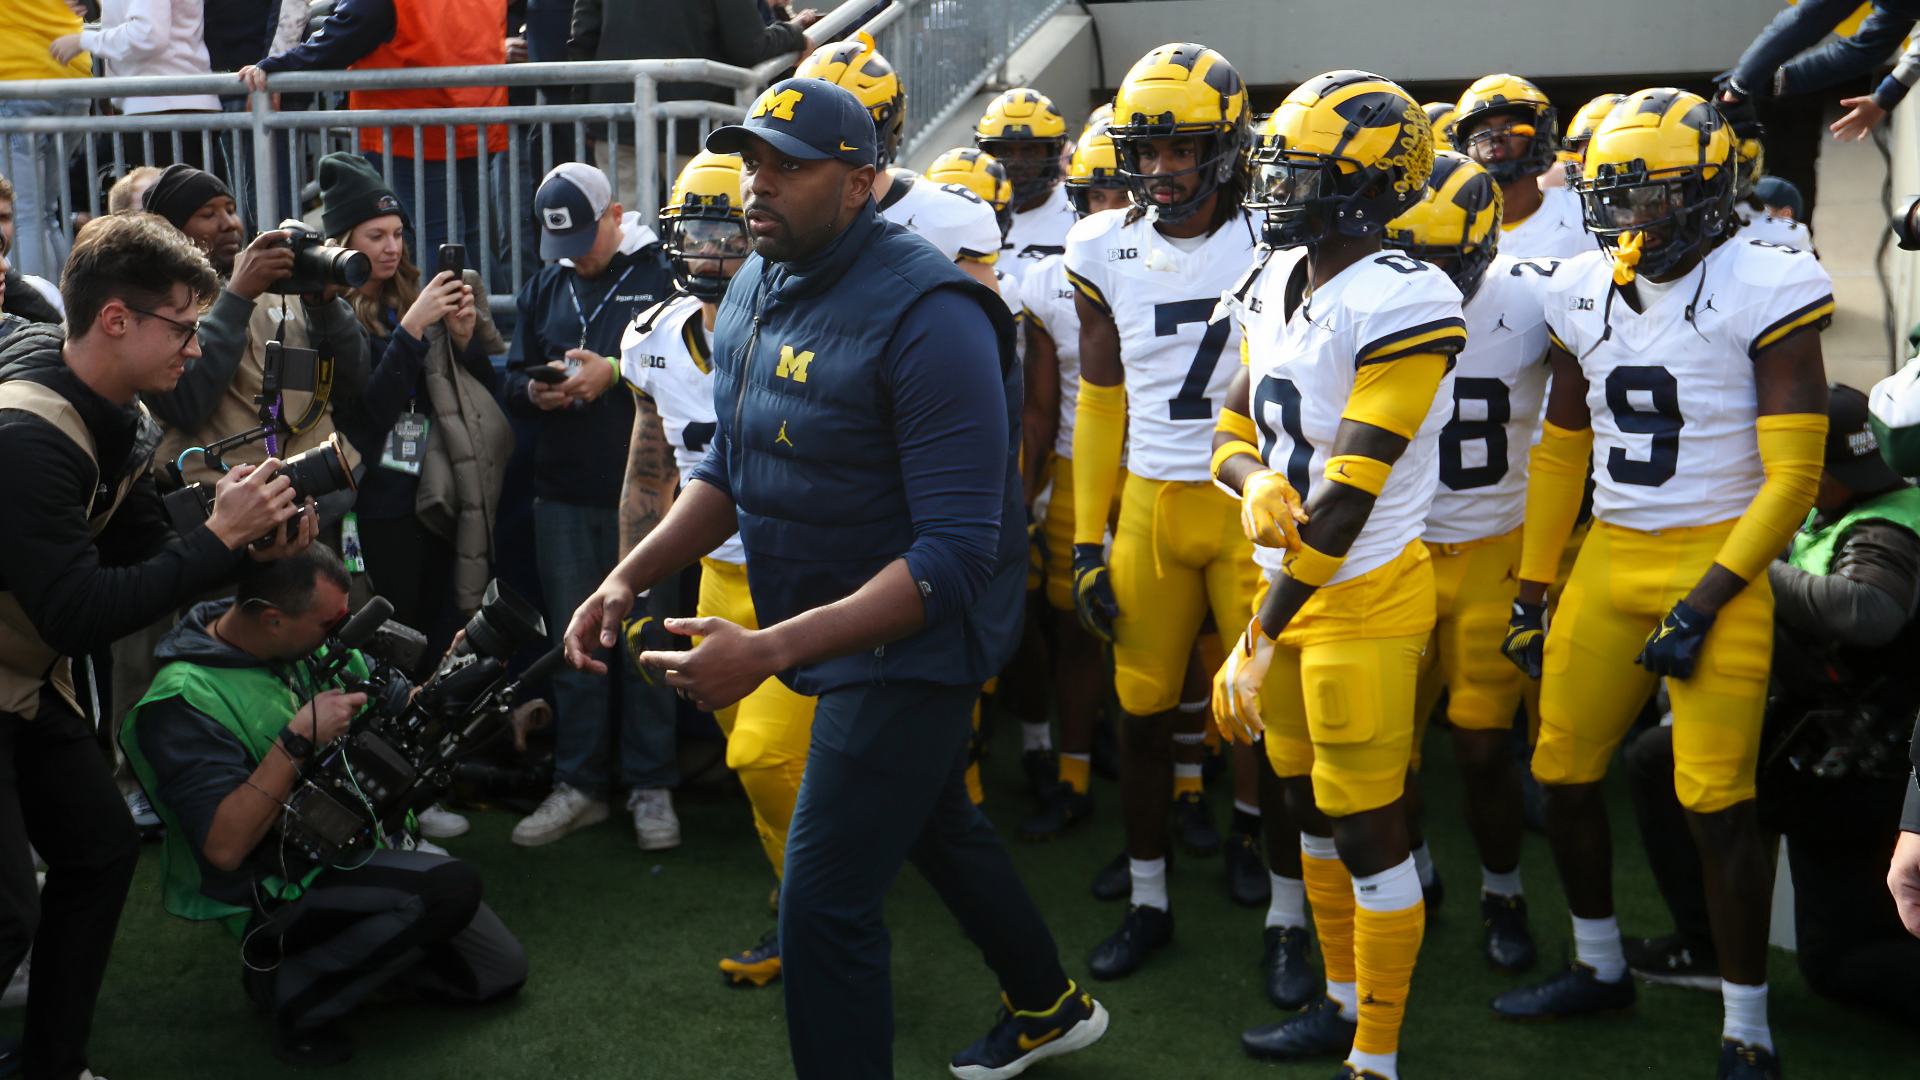 Fans React To Michigan’s Sherrone Moore’s Emotional Postgame After
Penn State Win